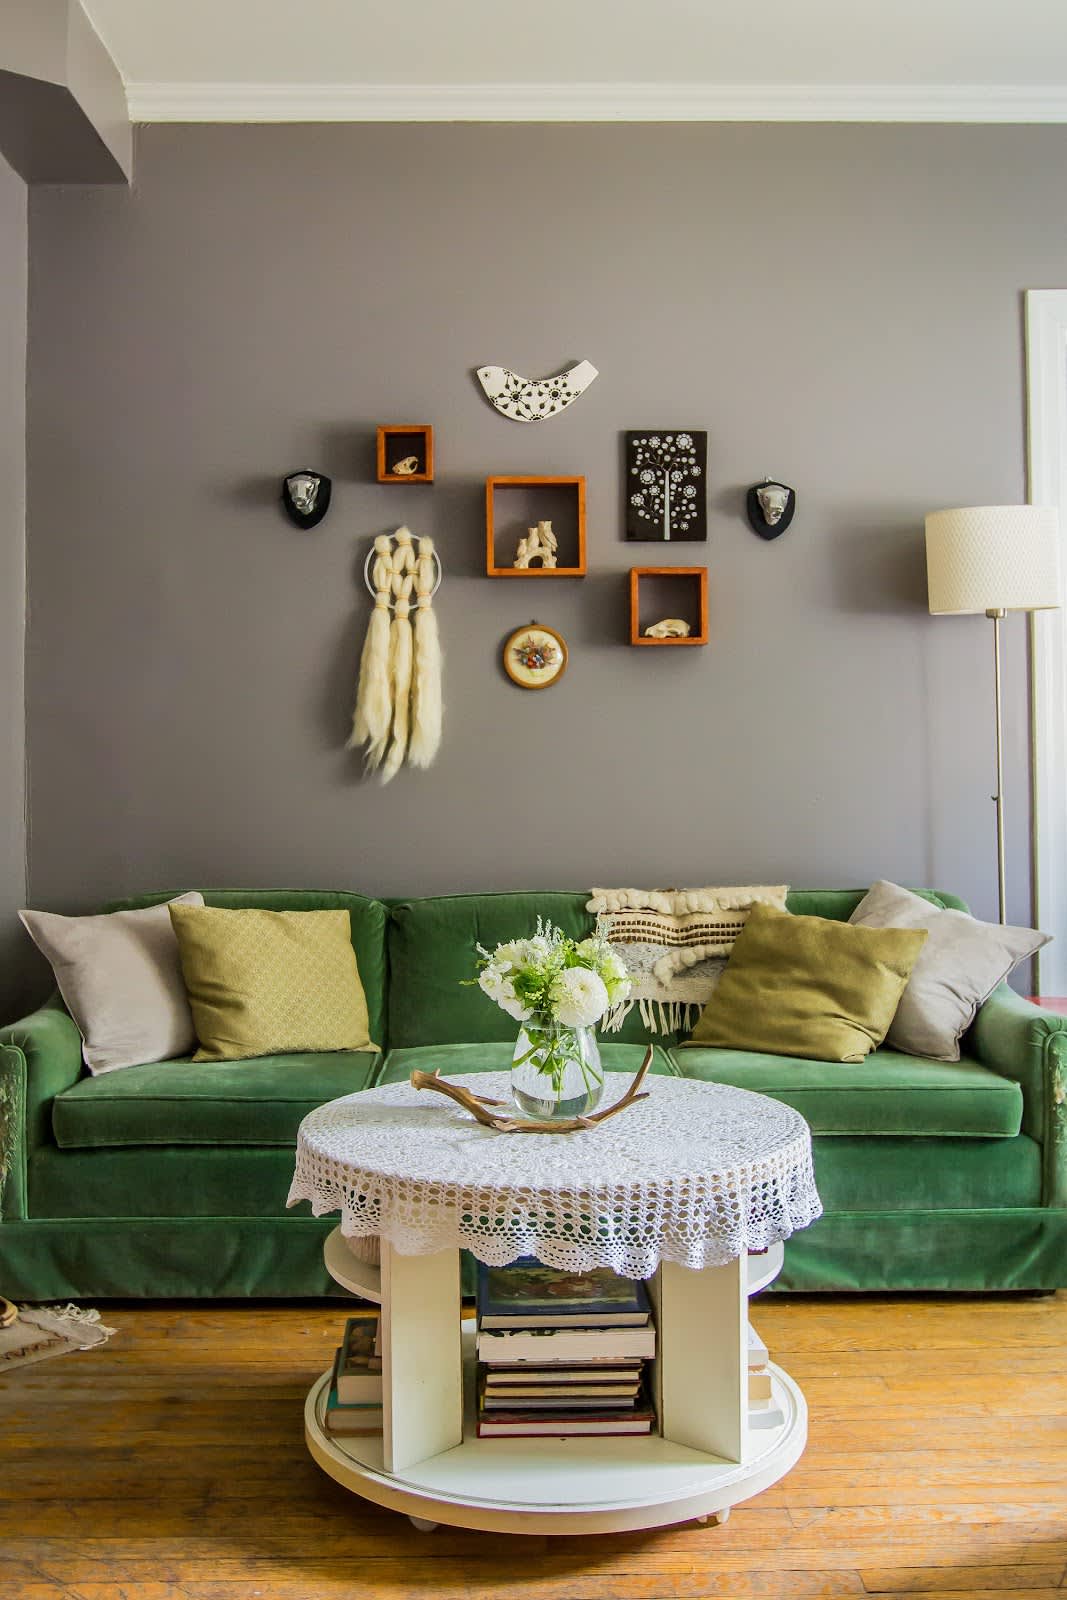 25 Welcoming Green Living Room Decor Ideas - Shelterness